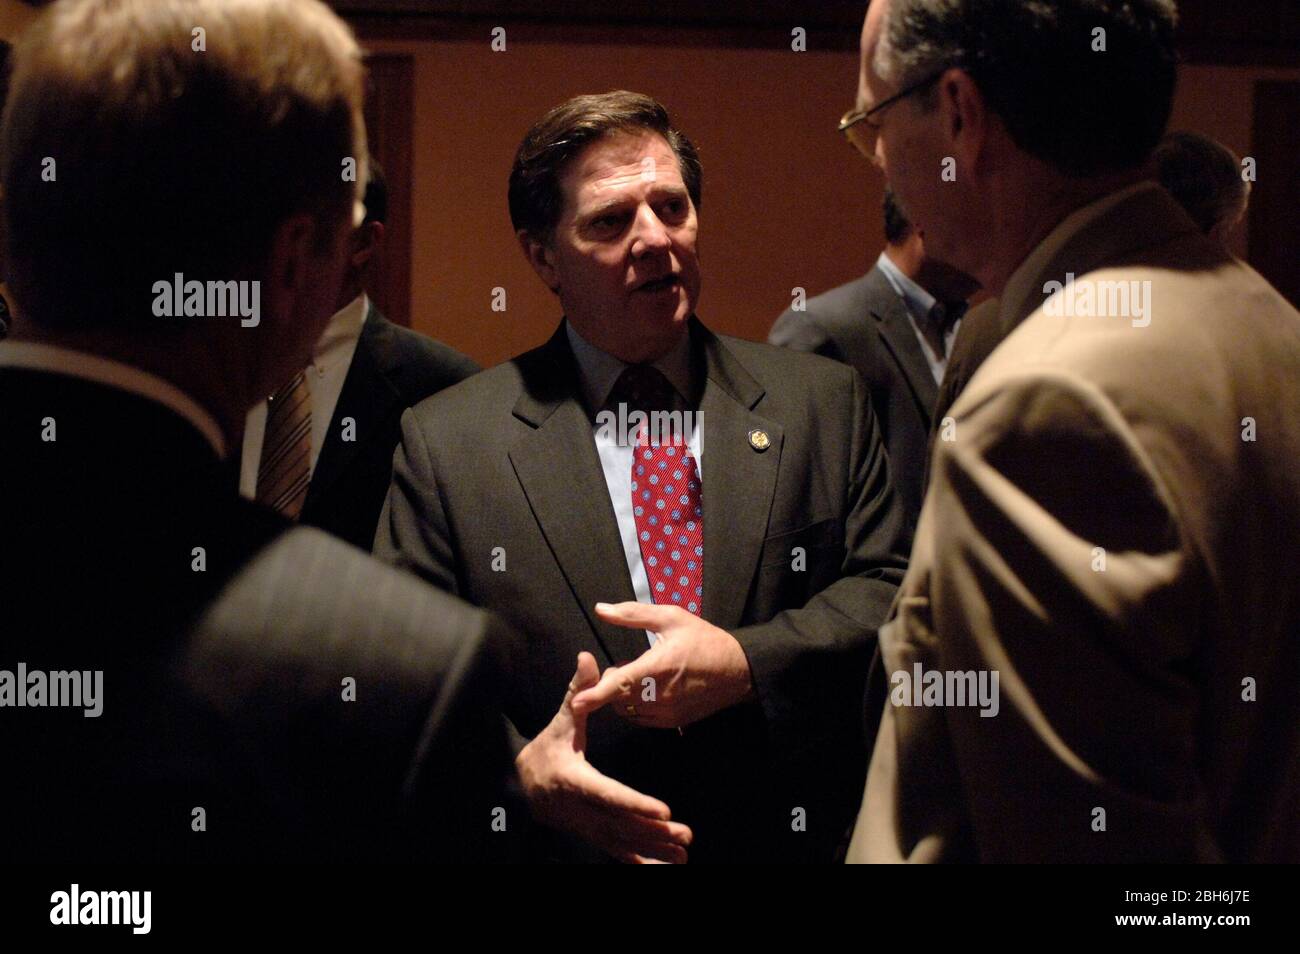 Midland, Texas USA, October 14, 2005: Former U.S. Congressman Tom Delay greets supporters at a luncheon to raise money for his legal defense fund. ©Bob Daemmrich Stock Photo